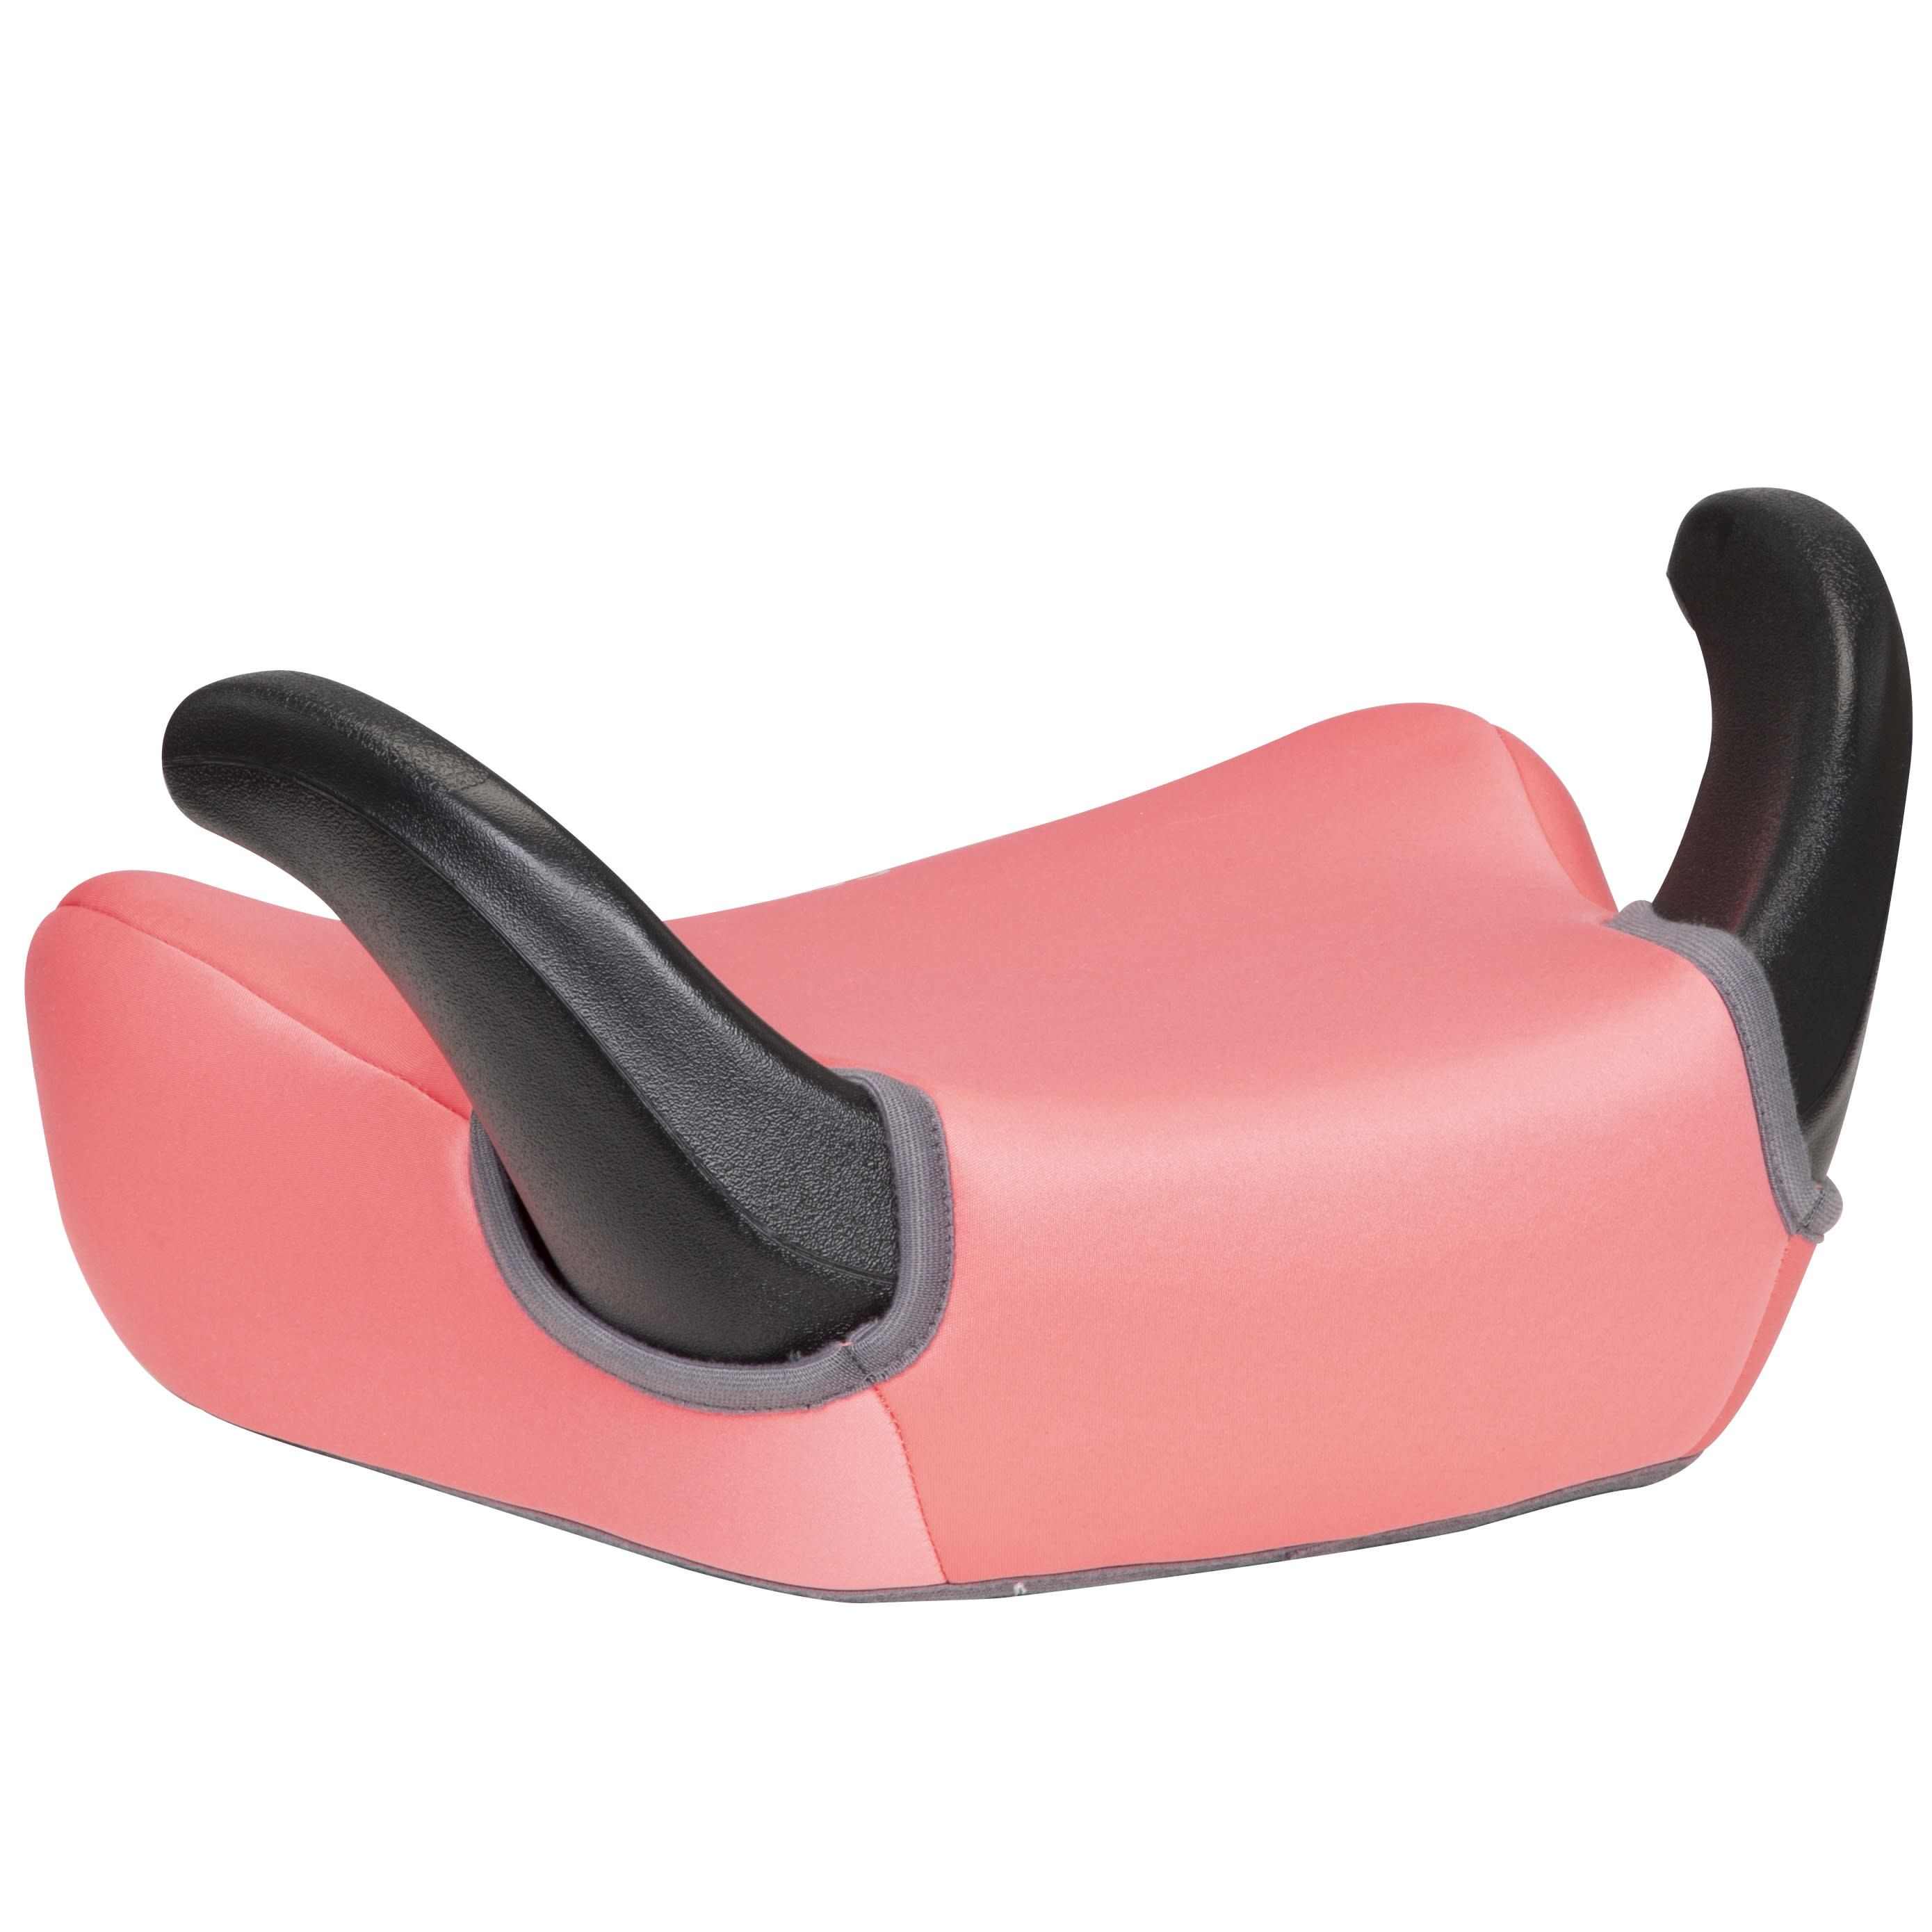 Cosco Rise Backless Booster Car Seat, Coral - image 5 of 16